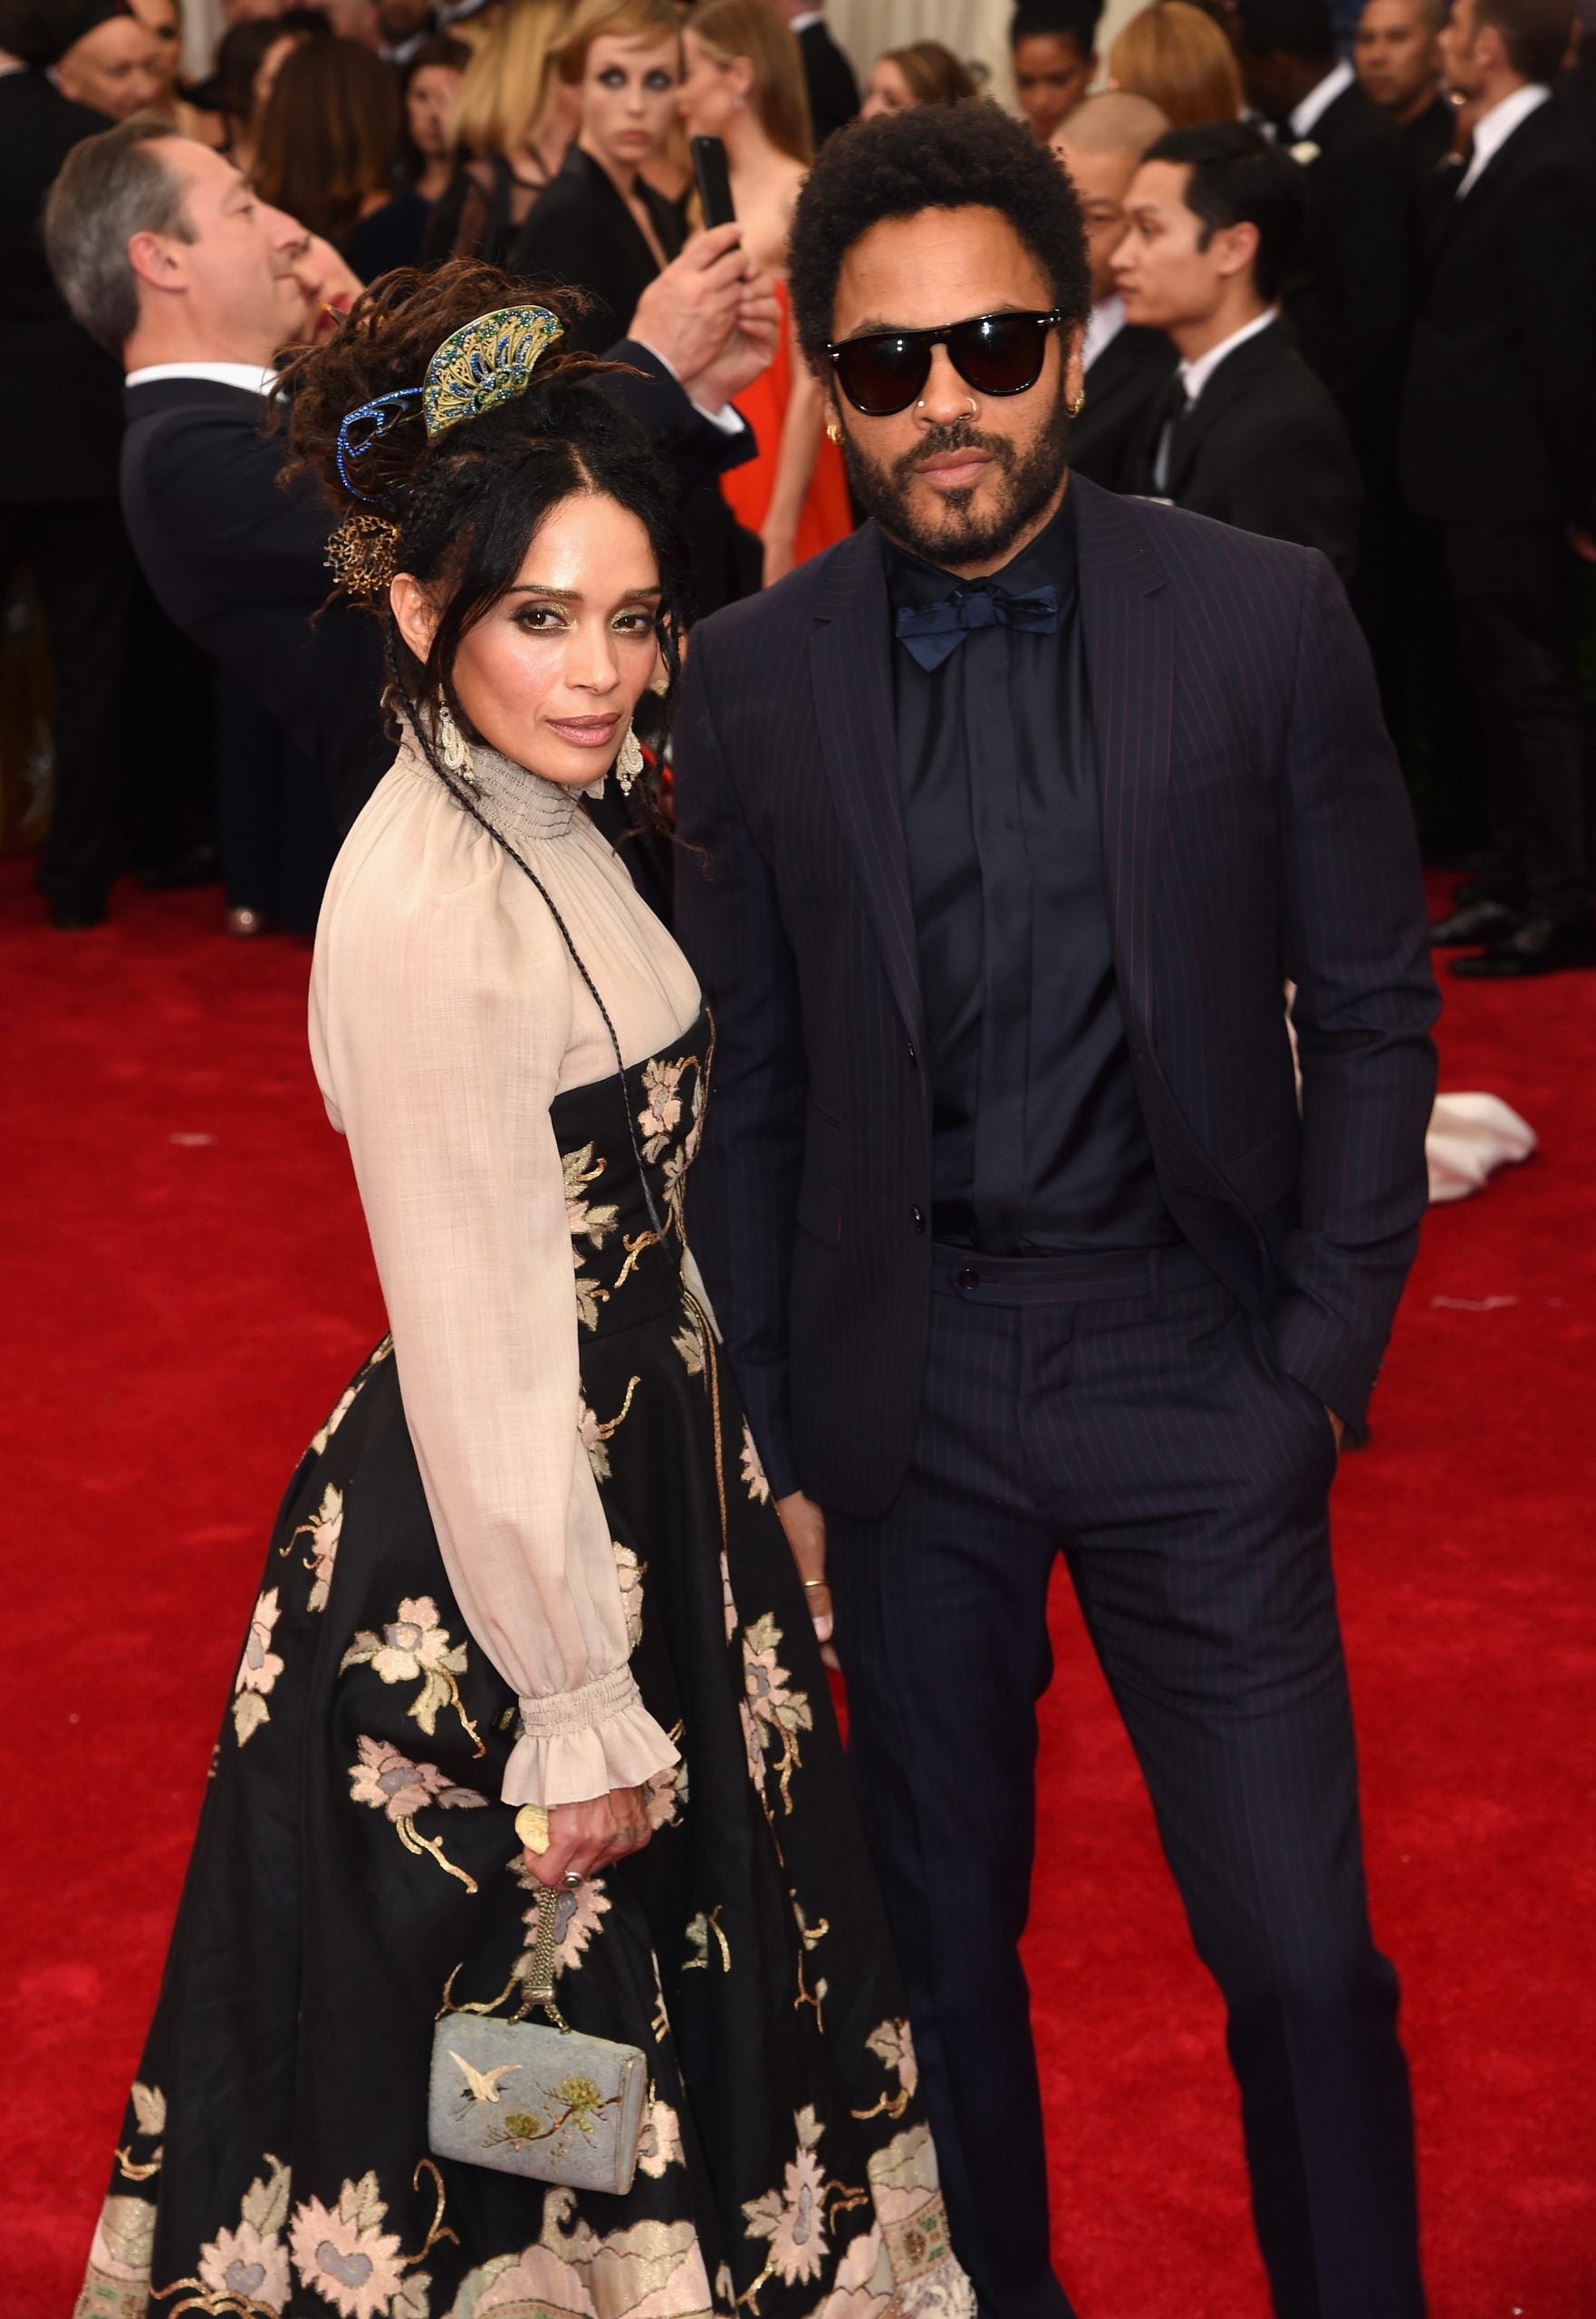 The Best Photos Of Lenny Kravitz And Lisa Bonet Over The Years